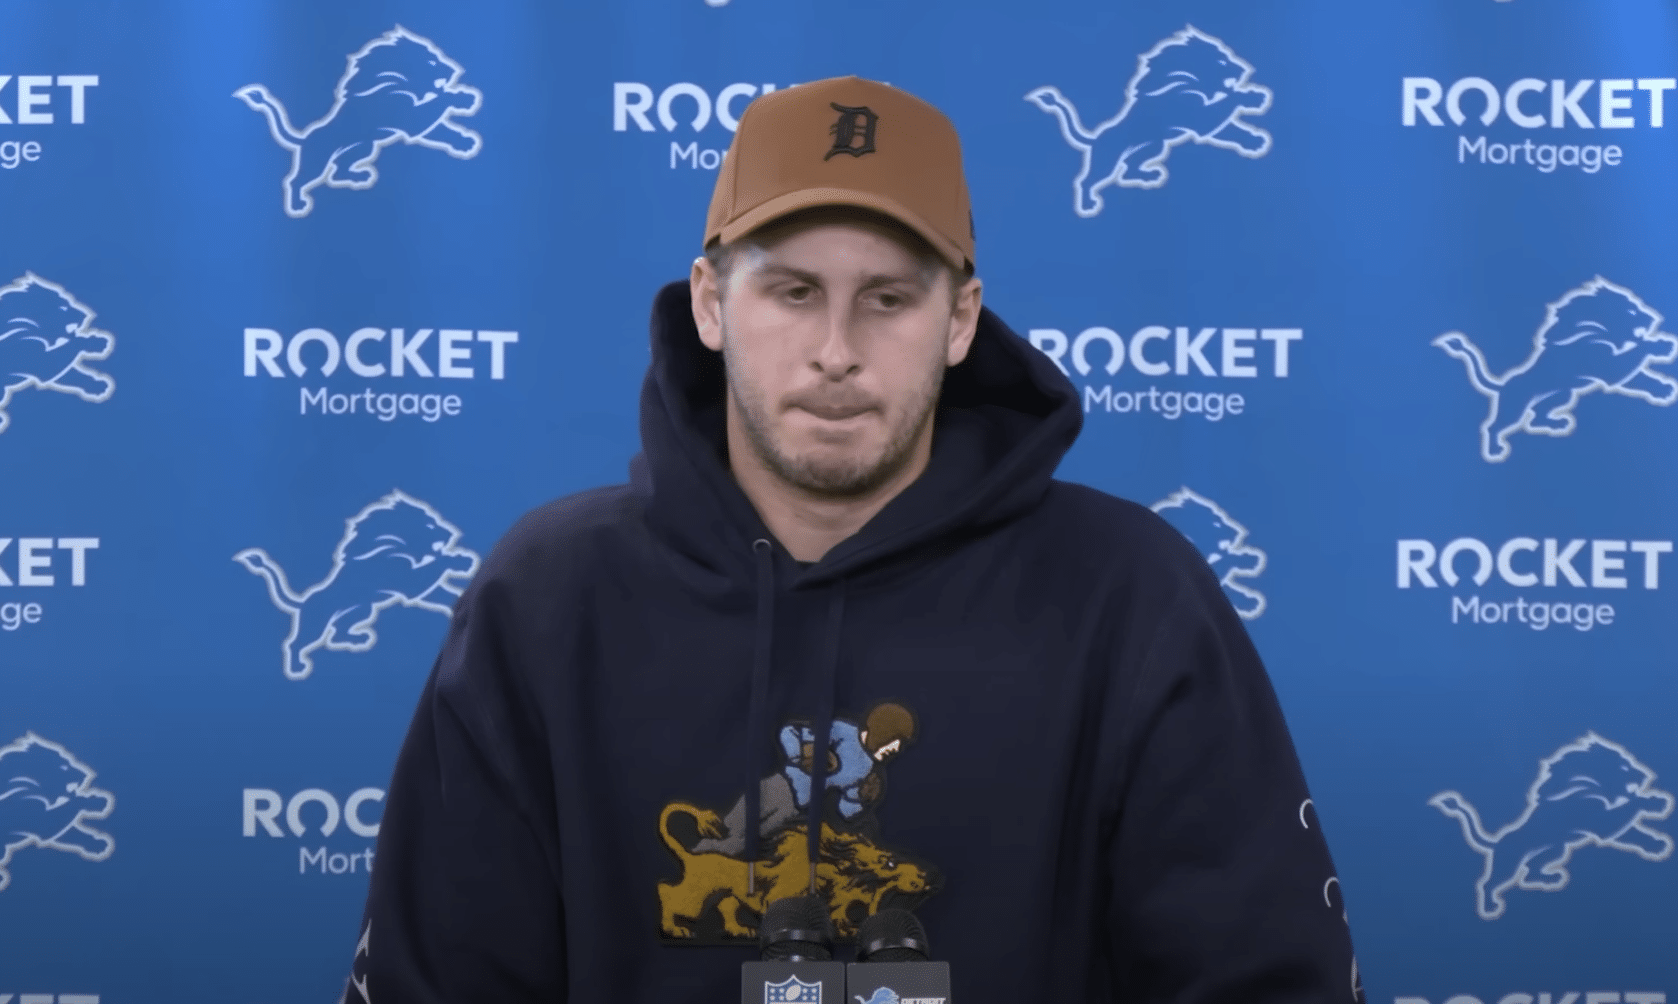 Jared Goff says Detroit LionsJared Goff gets emotional Jared Goff says Detroit Lions Jared Goff responds to question